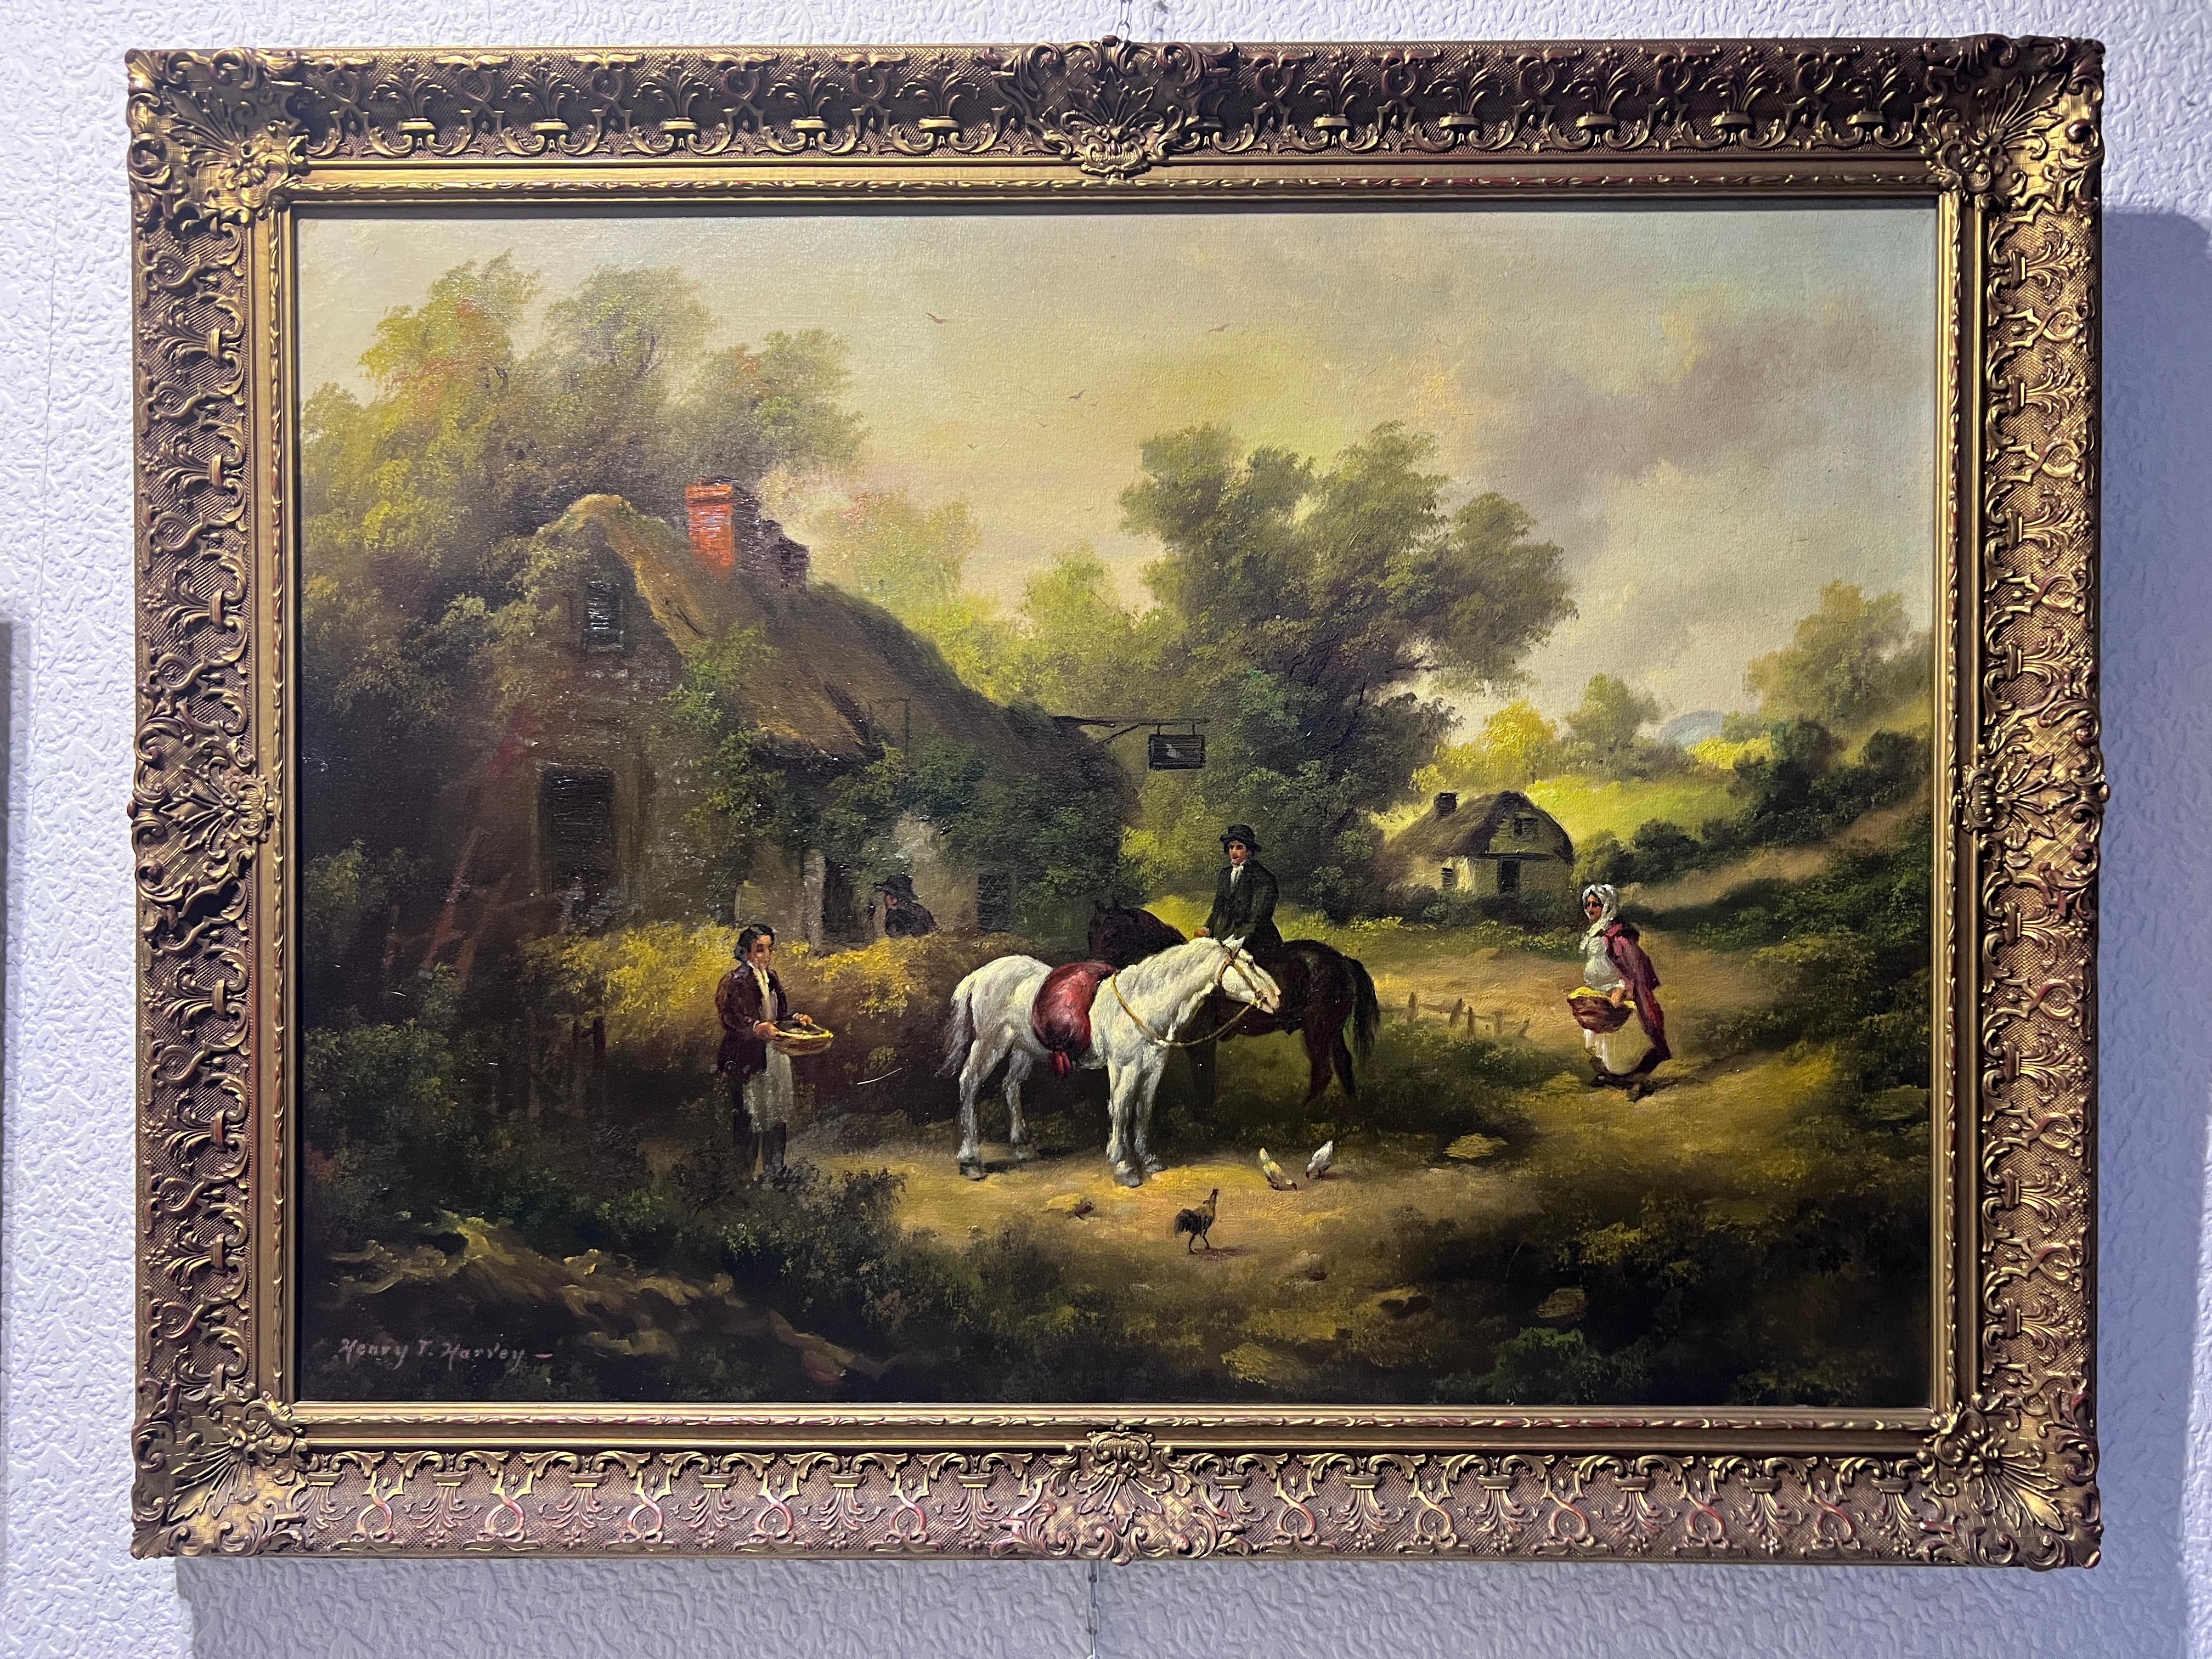 This is a Large antique original oil painting on canvas depicting a bucolic rural scene, lively with characters and activities. In the foreground, a young man on horseback converses with a woman holding a basket, suggesting a moment of daily